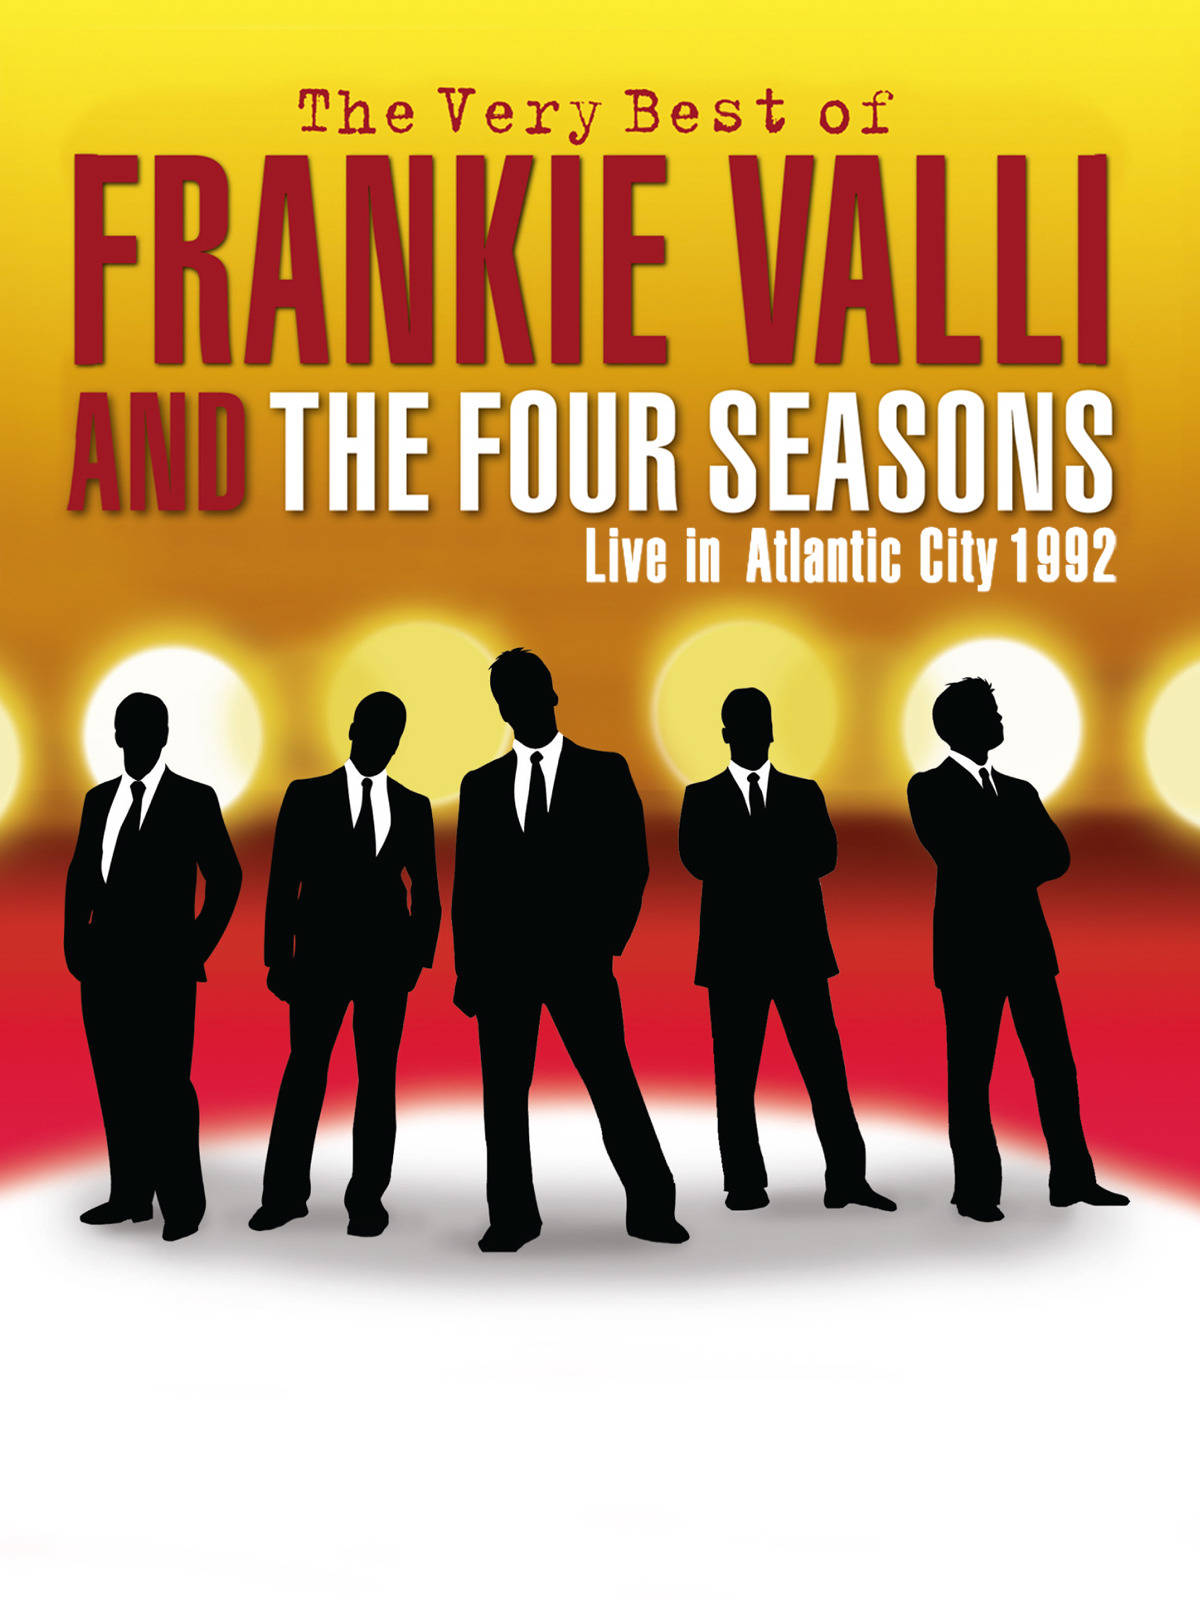 Let's Hang Frankie Valli And The Four Seasons Wallpaper